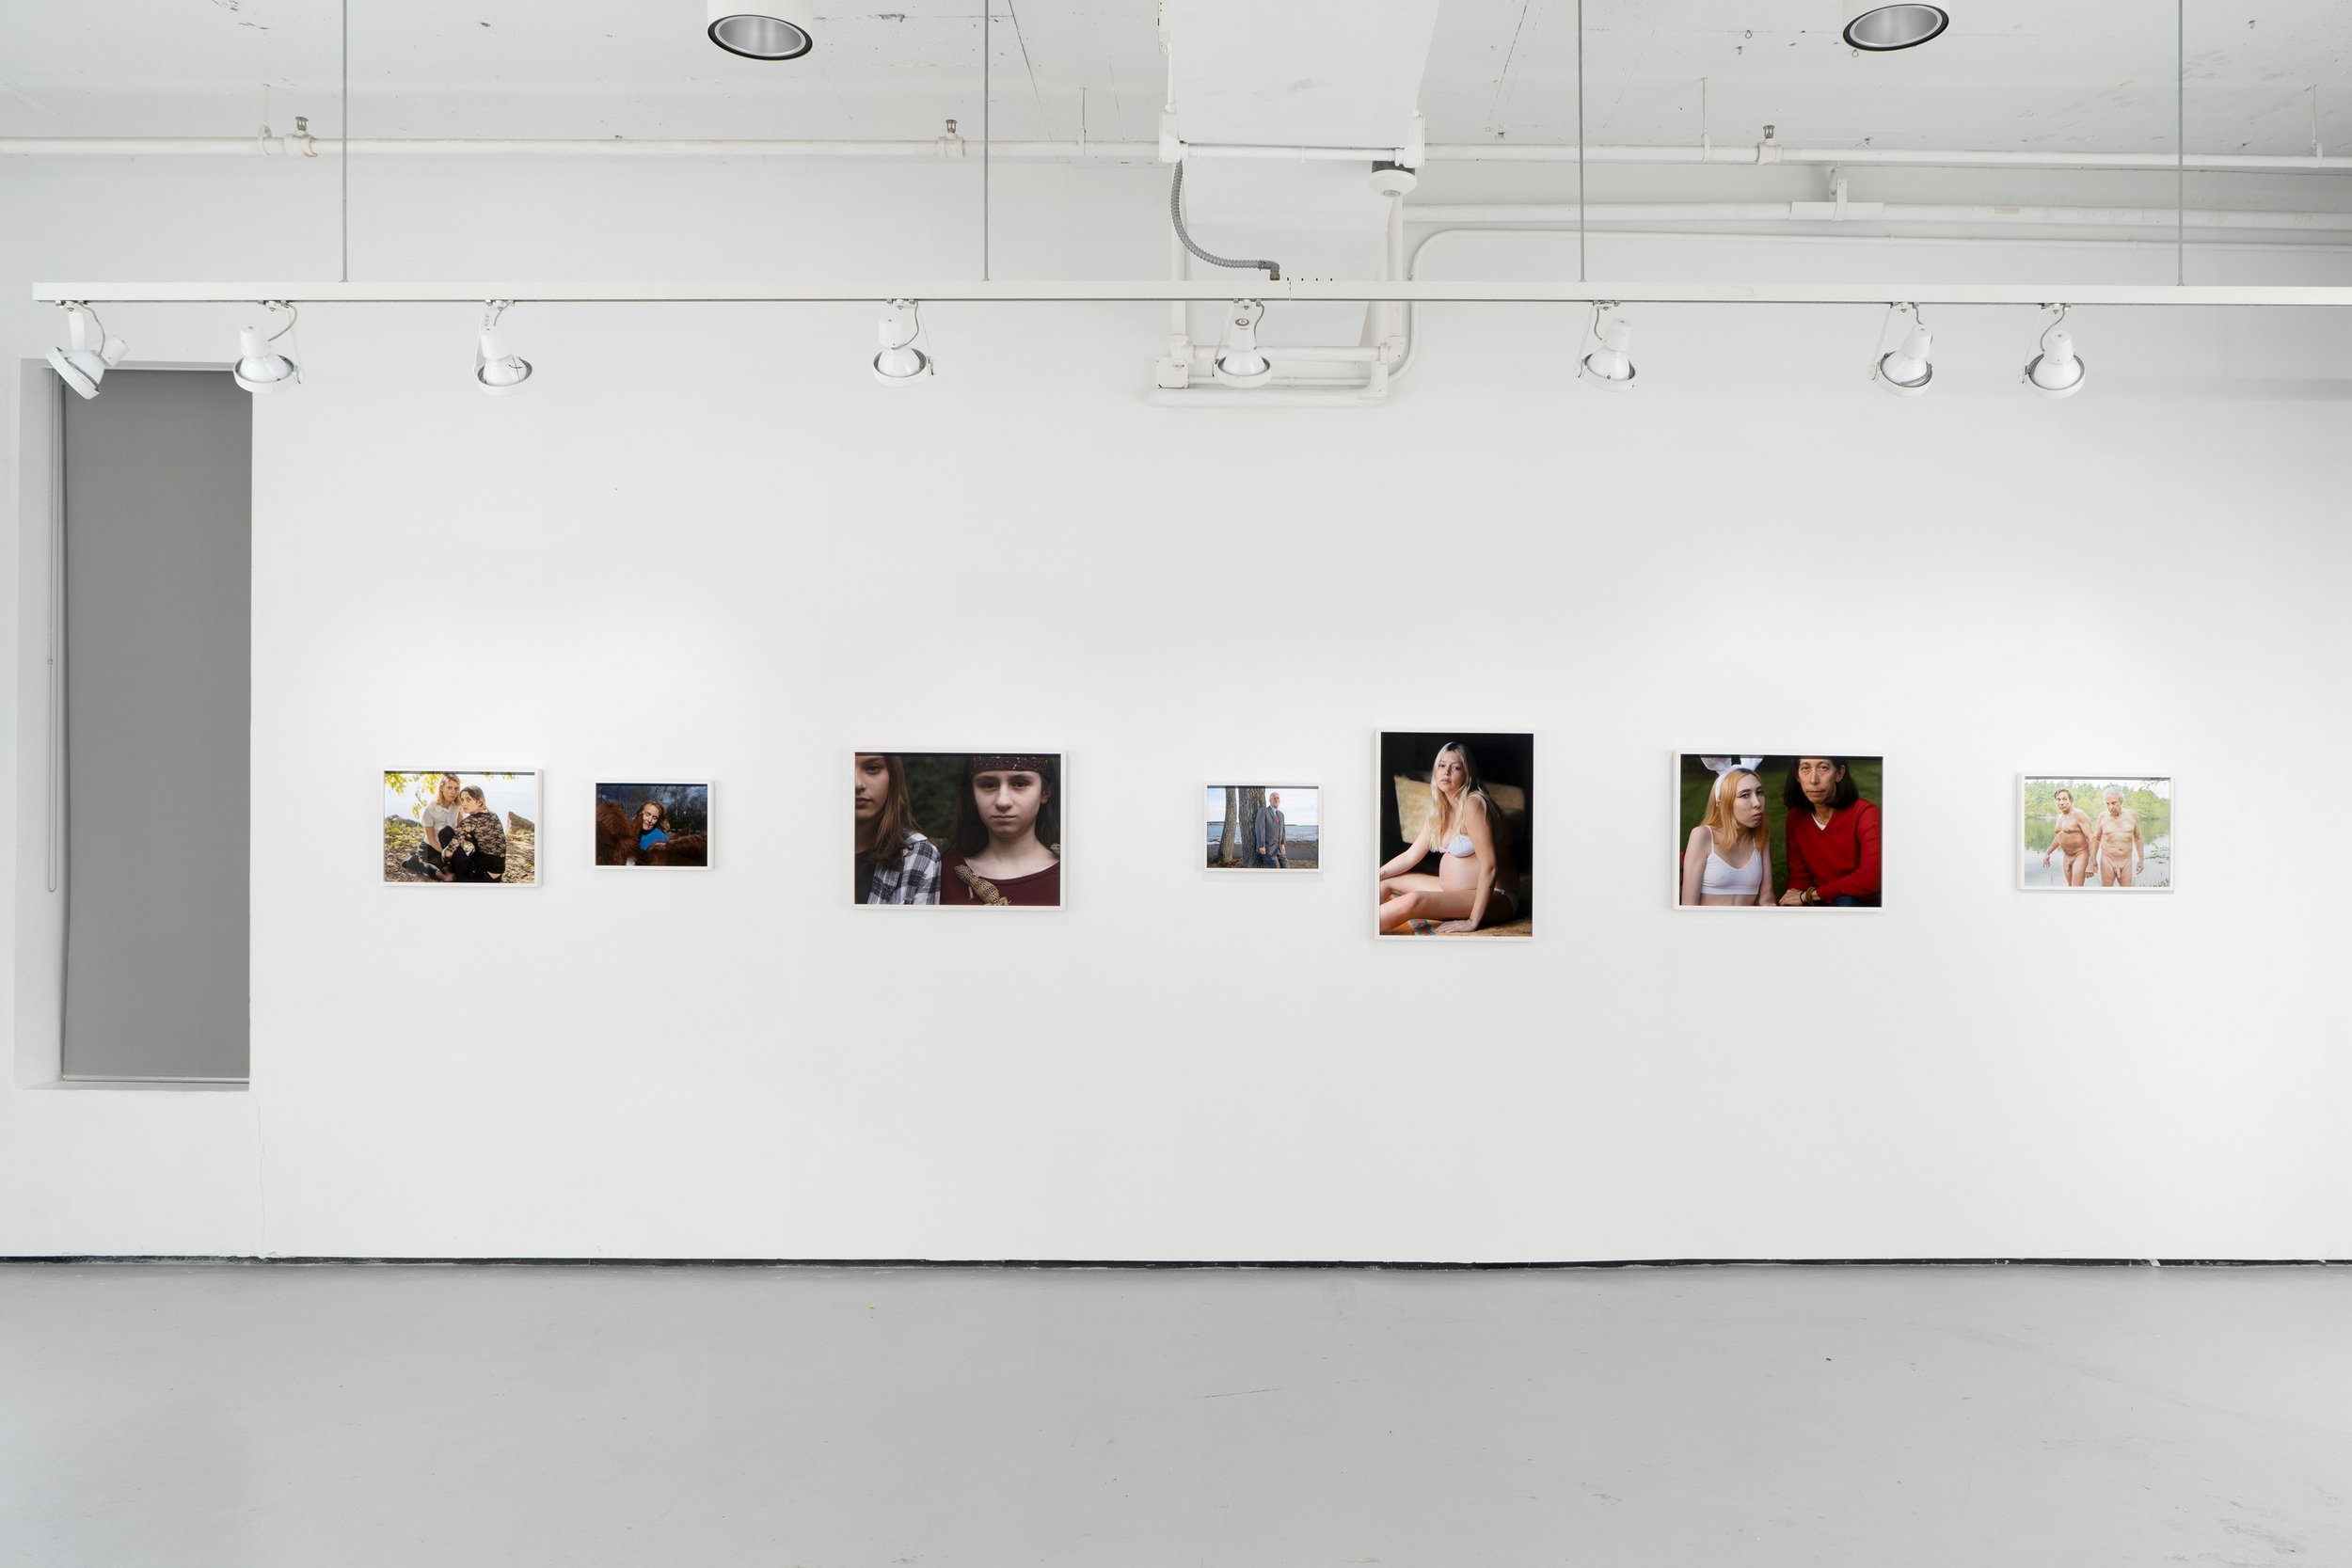  Installation view at Yale School of Art, 2022 